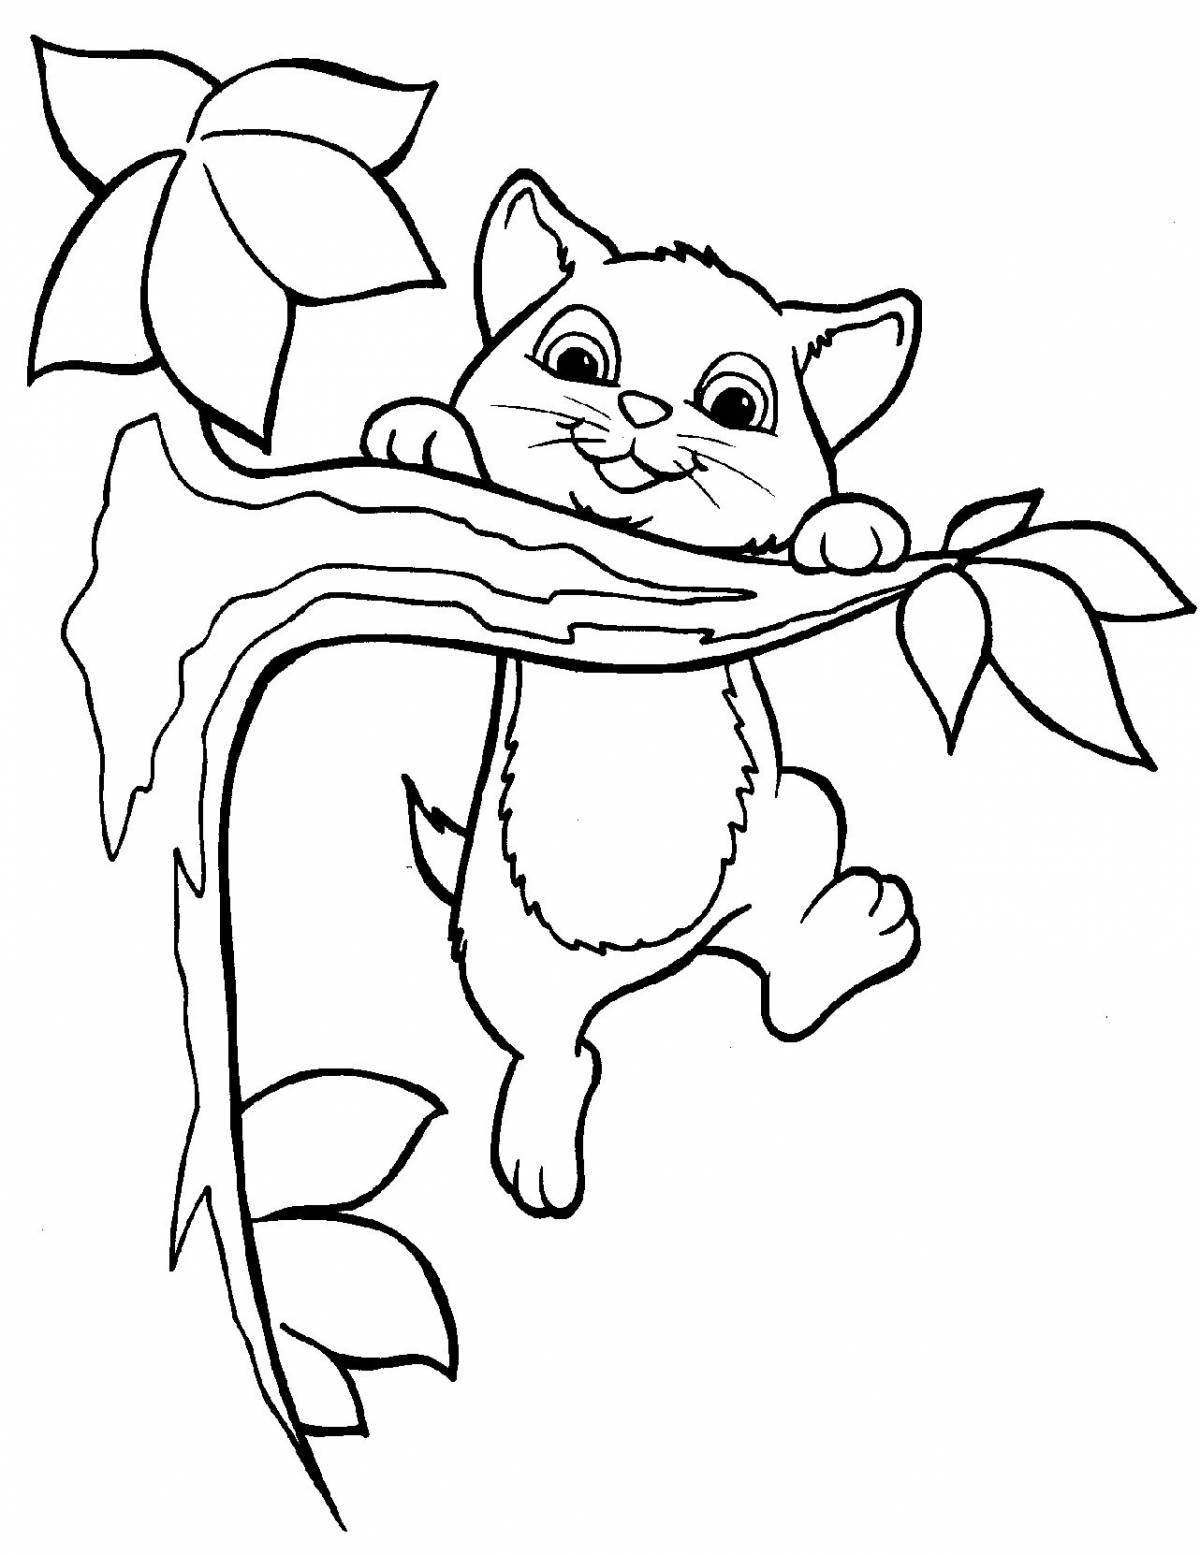 Naughty coloring pages for kids 5-6 years old cats